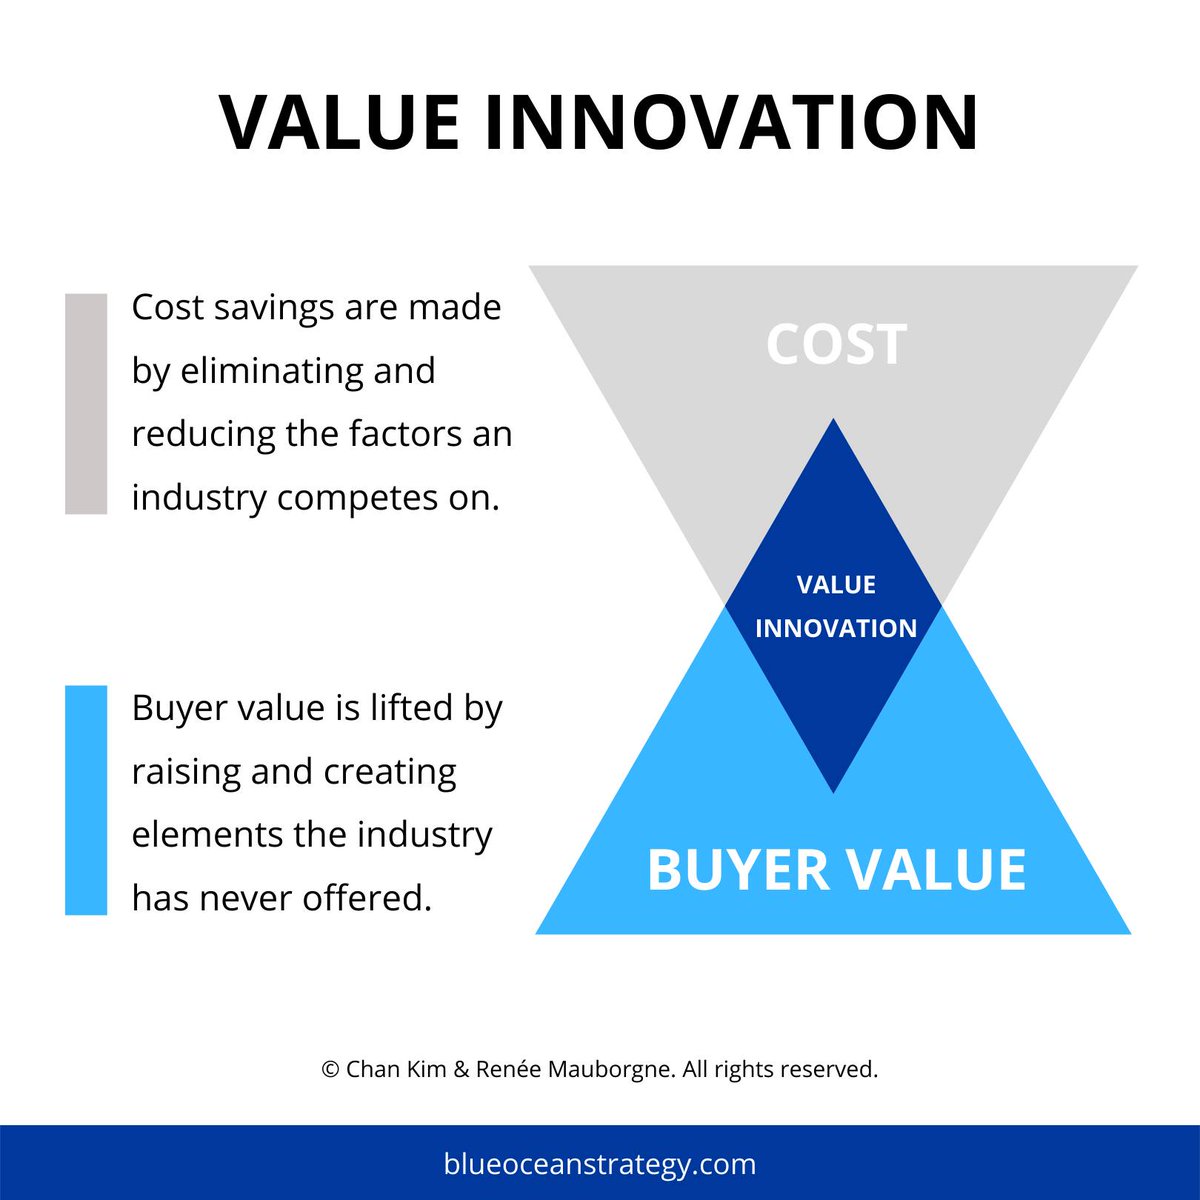 Value Innovation is the simultaneous pursuit of differentiation and low cost, creating a leap in value for both buyers and the company. To learn how to pursue value innovation, check out our online course. Enroll today: bit.ly/3D5Zxne #blueoceanstrategy